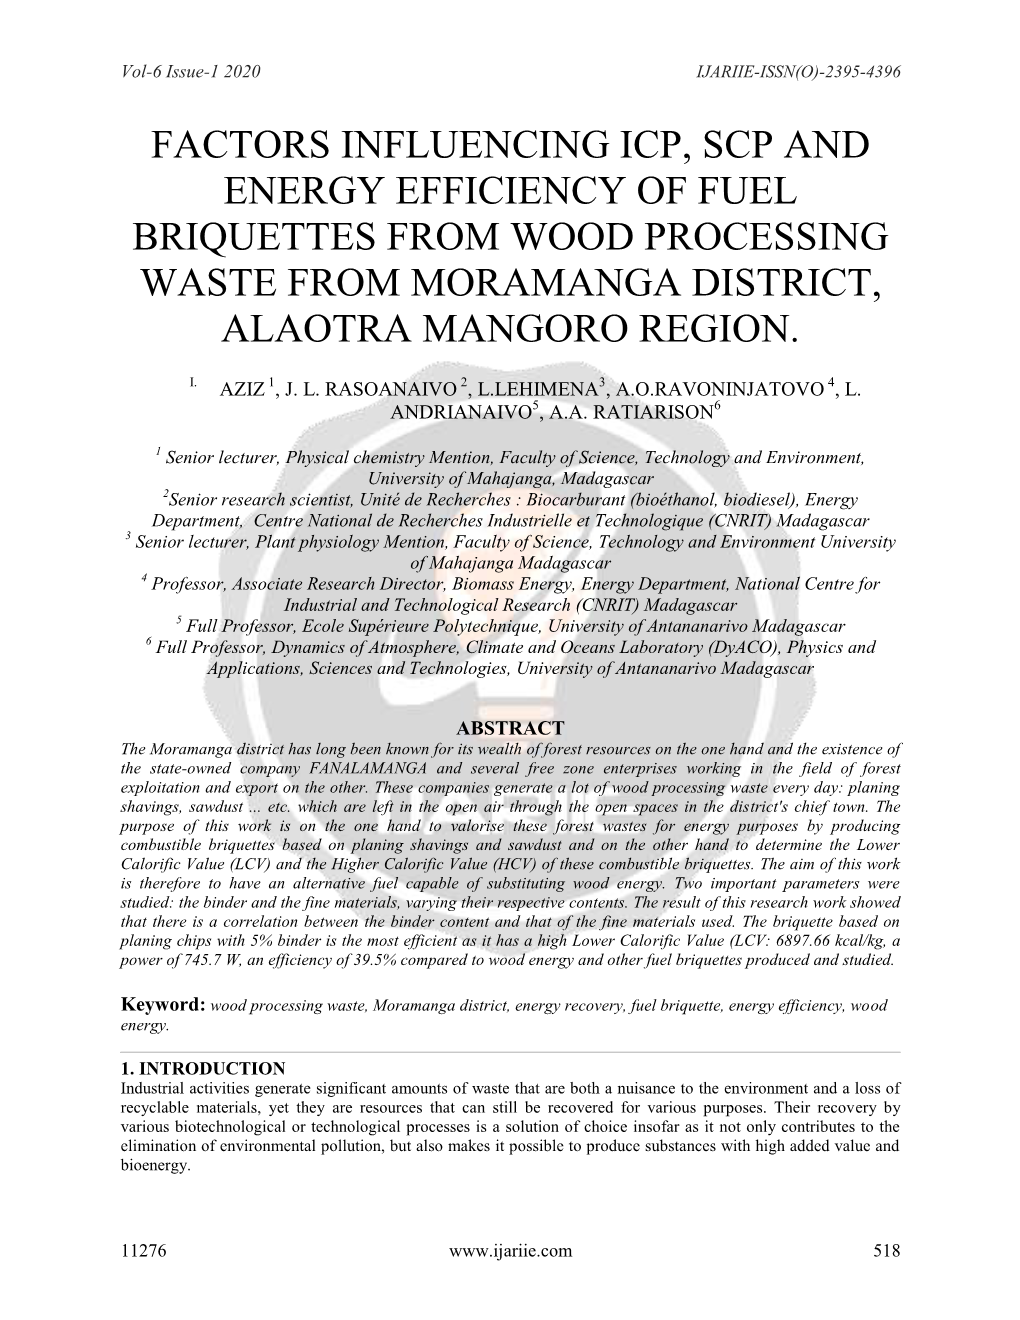 Factors Influencing Icp, Scp and Energy Efficiency of Fuel Briquettes from Wood Processing Waste from Moramanga District, Alaotra Mangoro Region